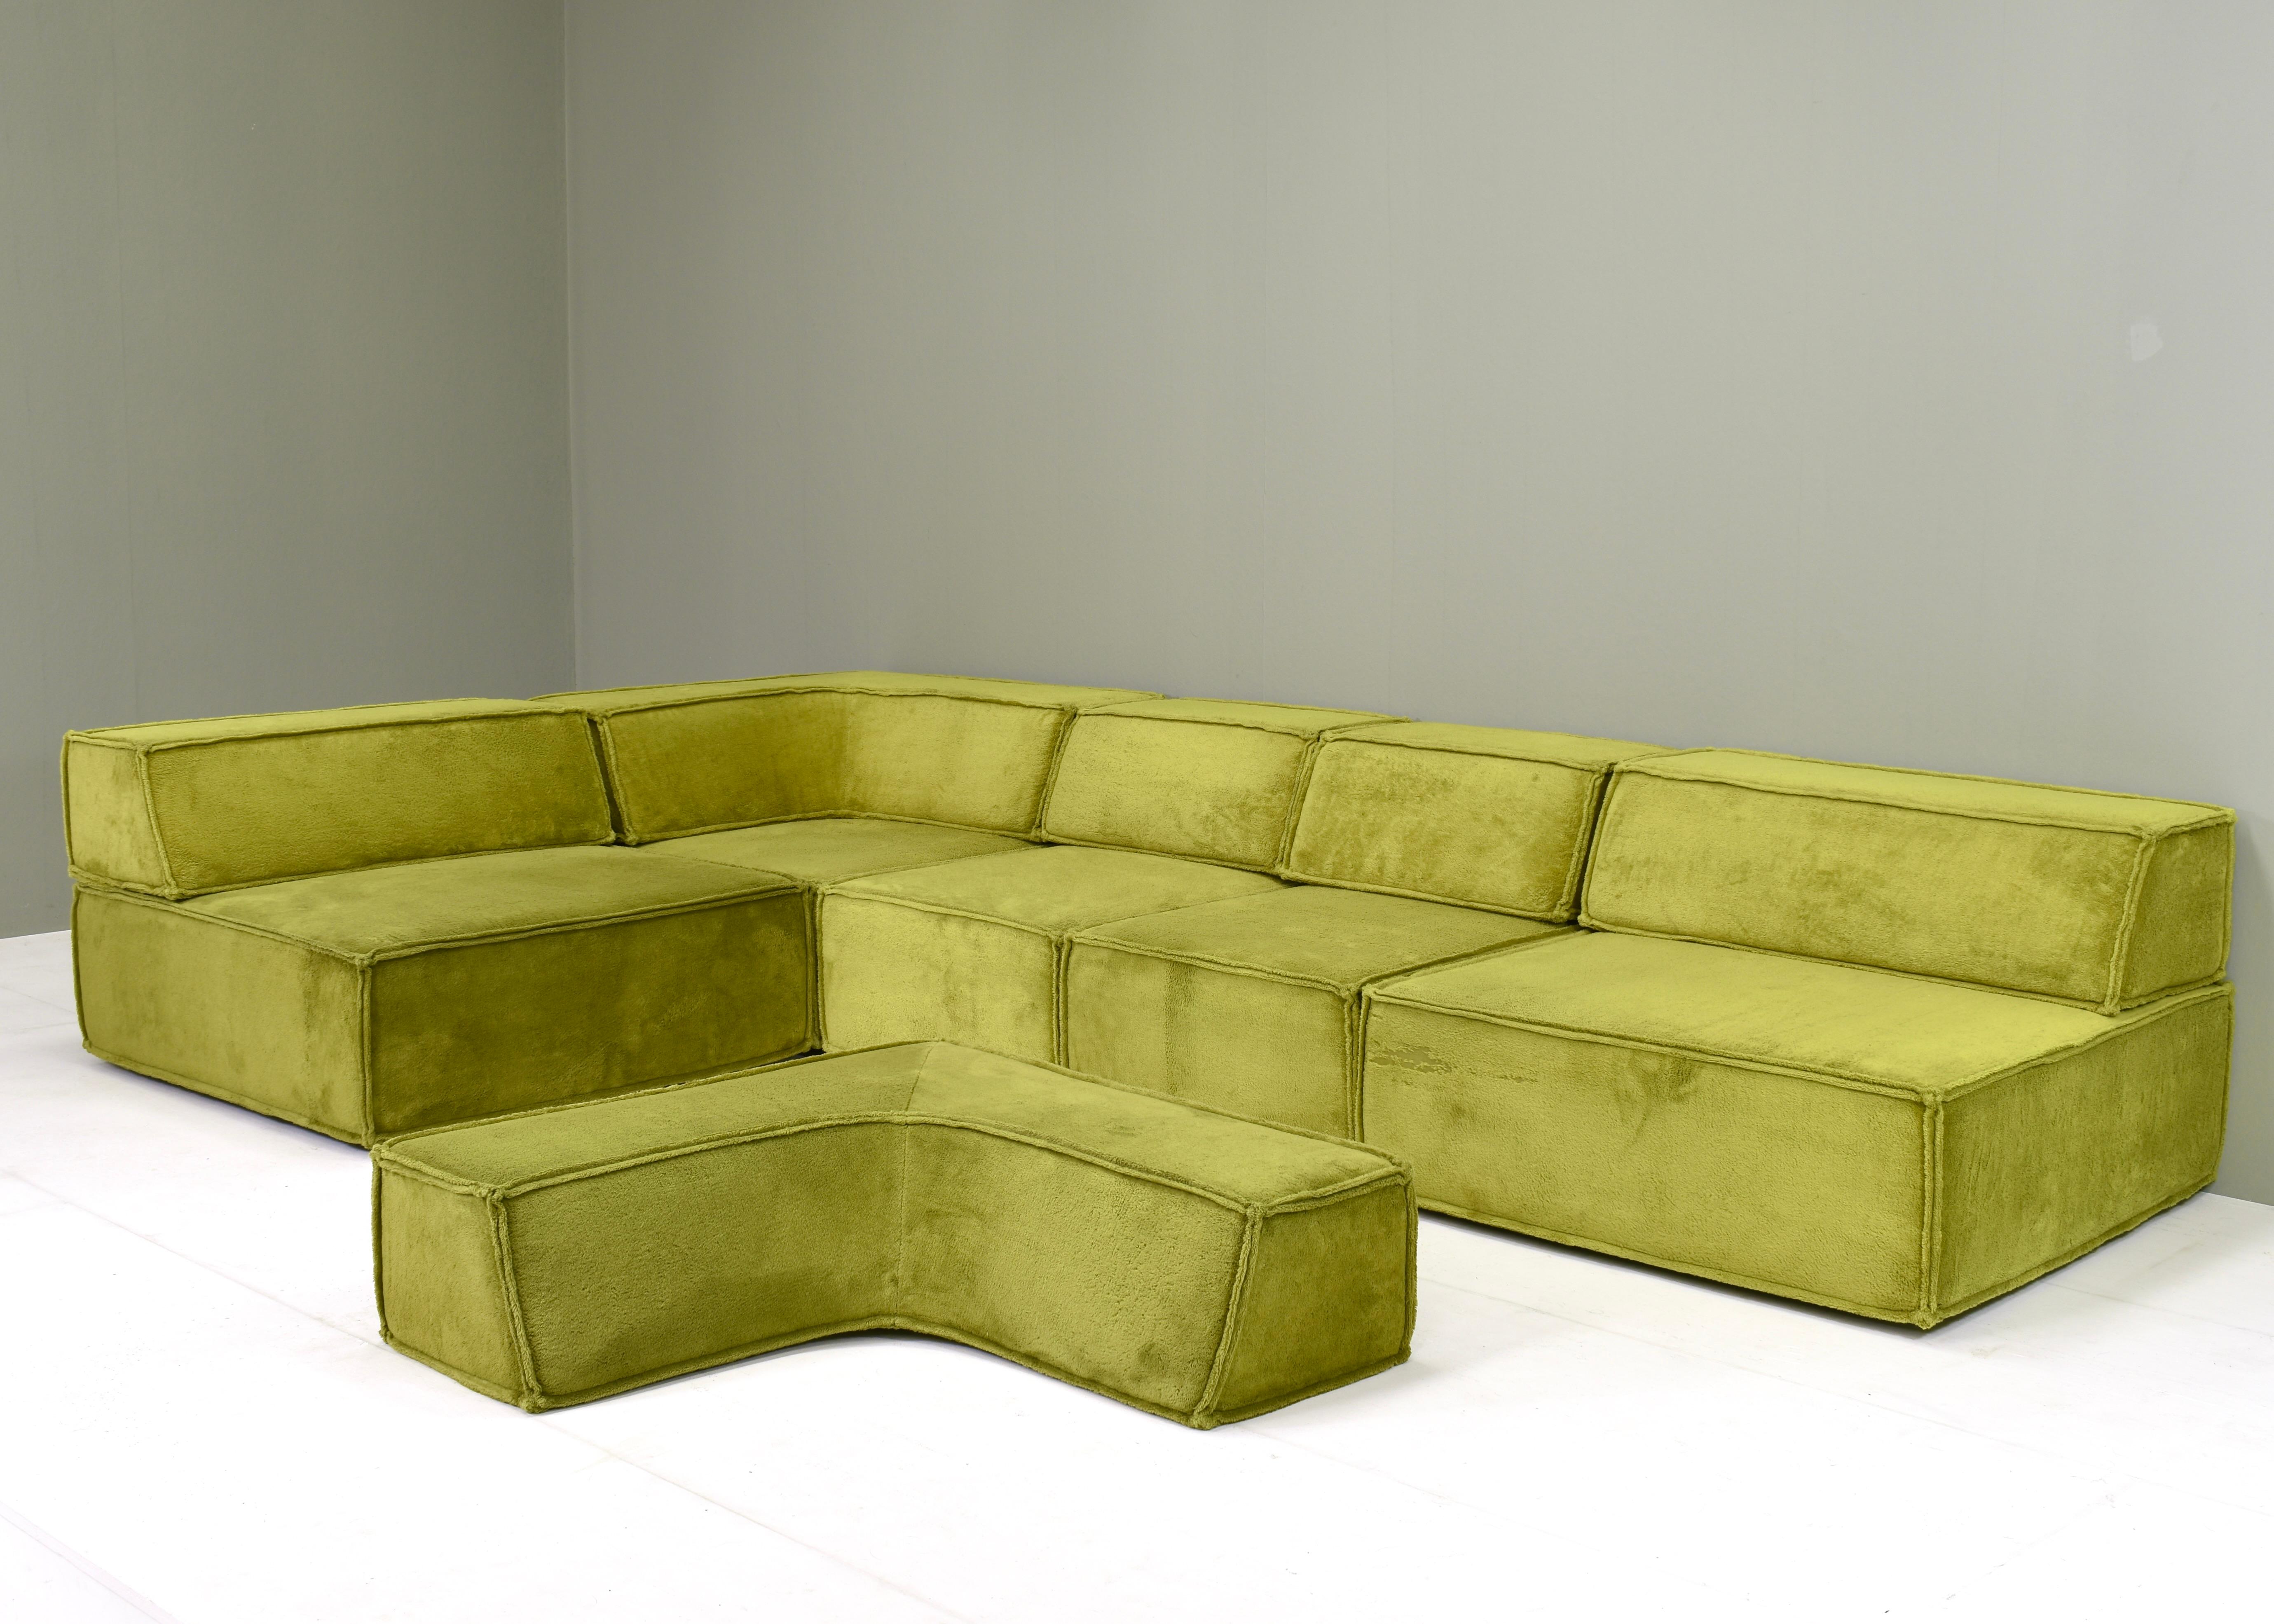 Fabric COR Trio Sectional Sofa by Team Form Ag for COR, Germany / Switzerland, 1972